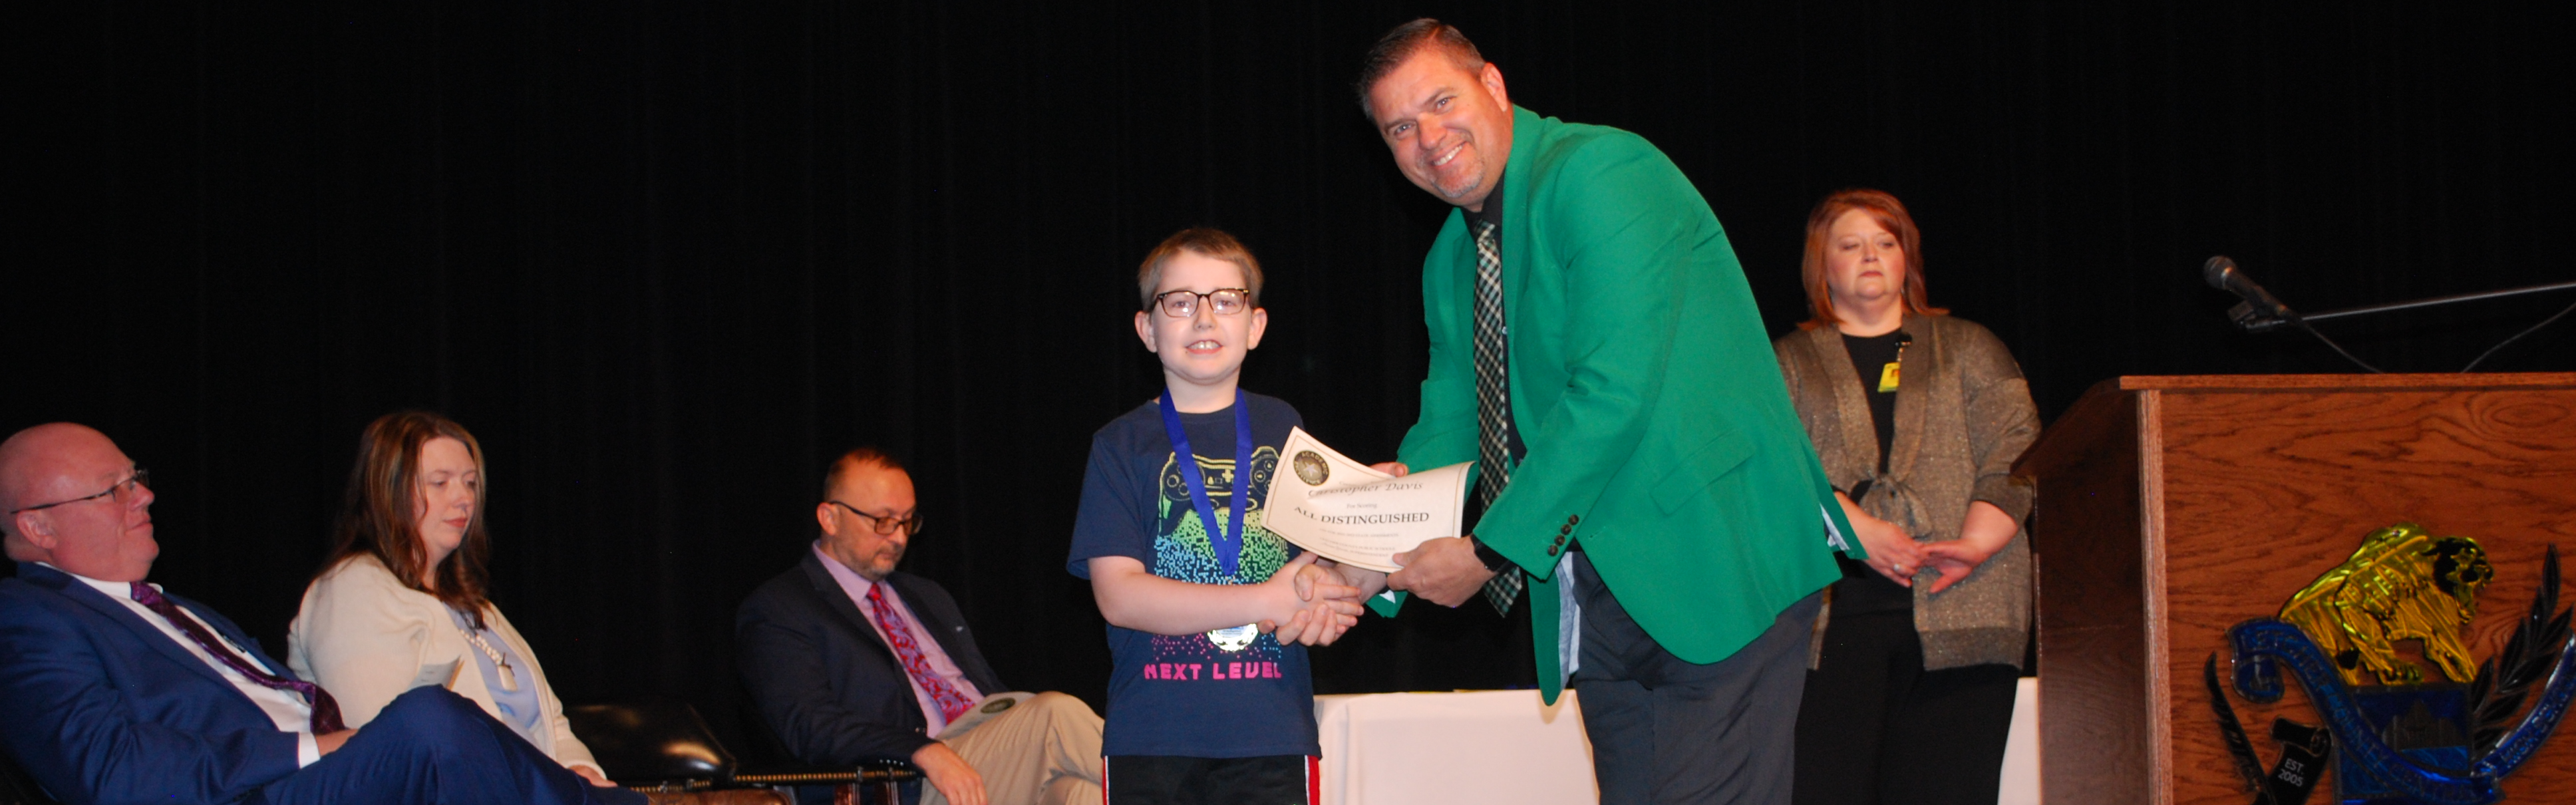 Arlie Boggs Elementary student receiving all distinguished test award.